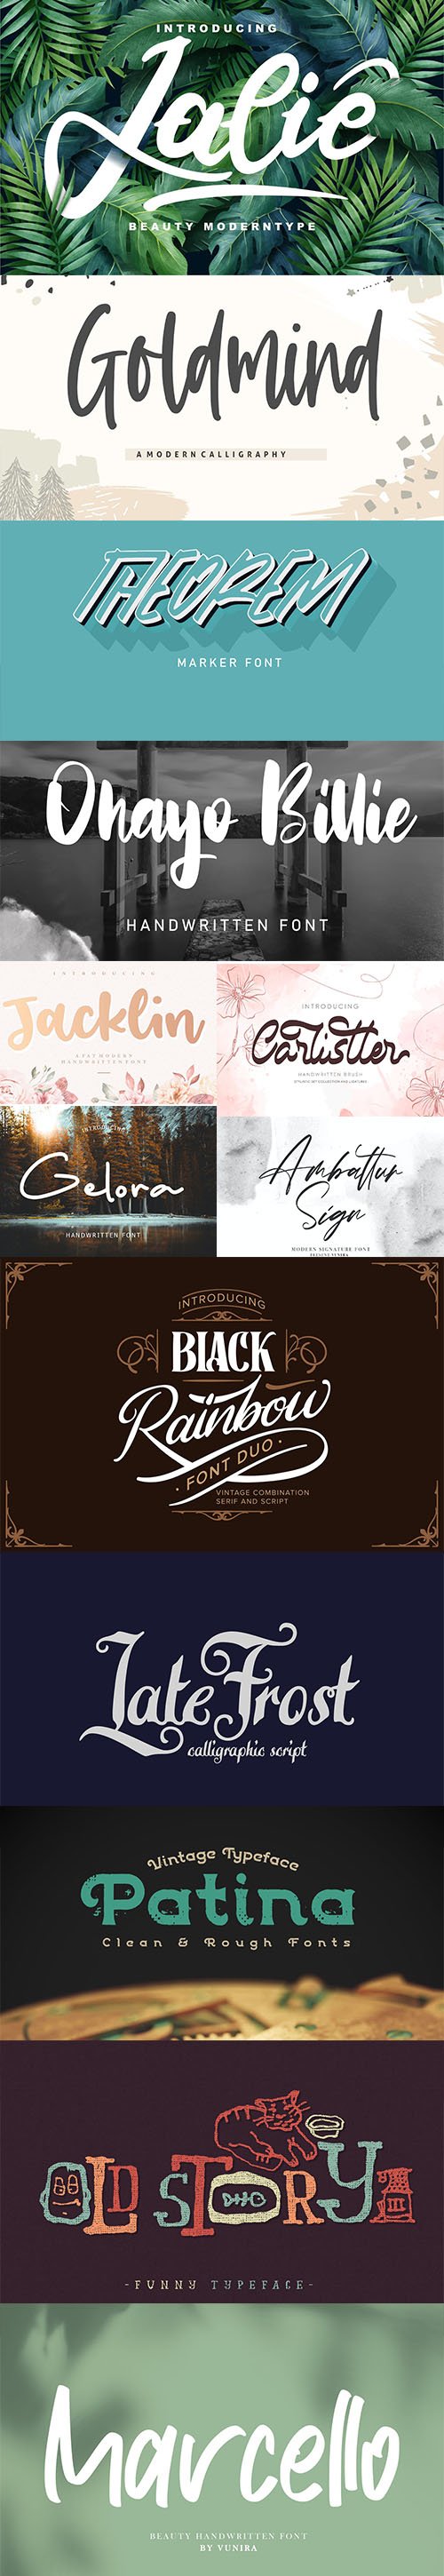 Collection of 13 Creative Fresh Fonts